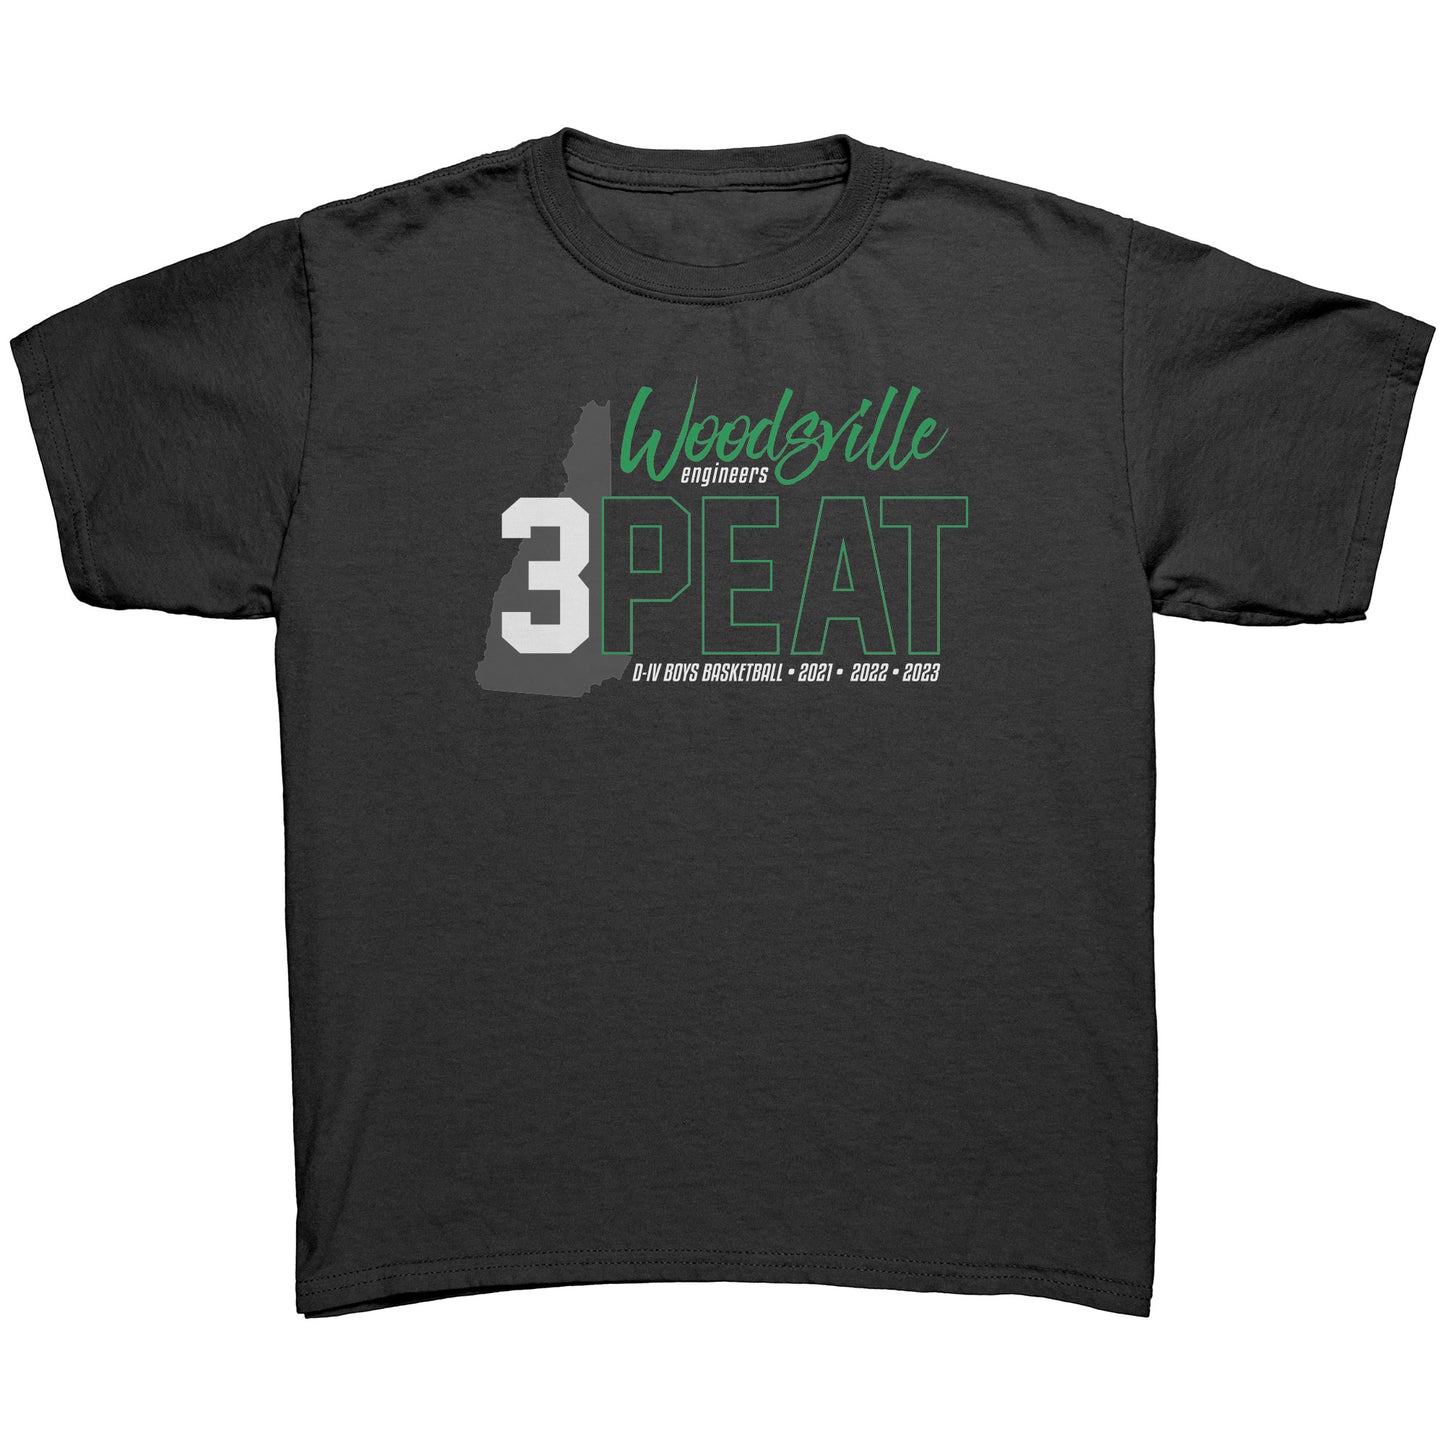 Woodsville 3-Peat: Youth T-Shirt